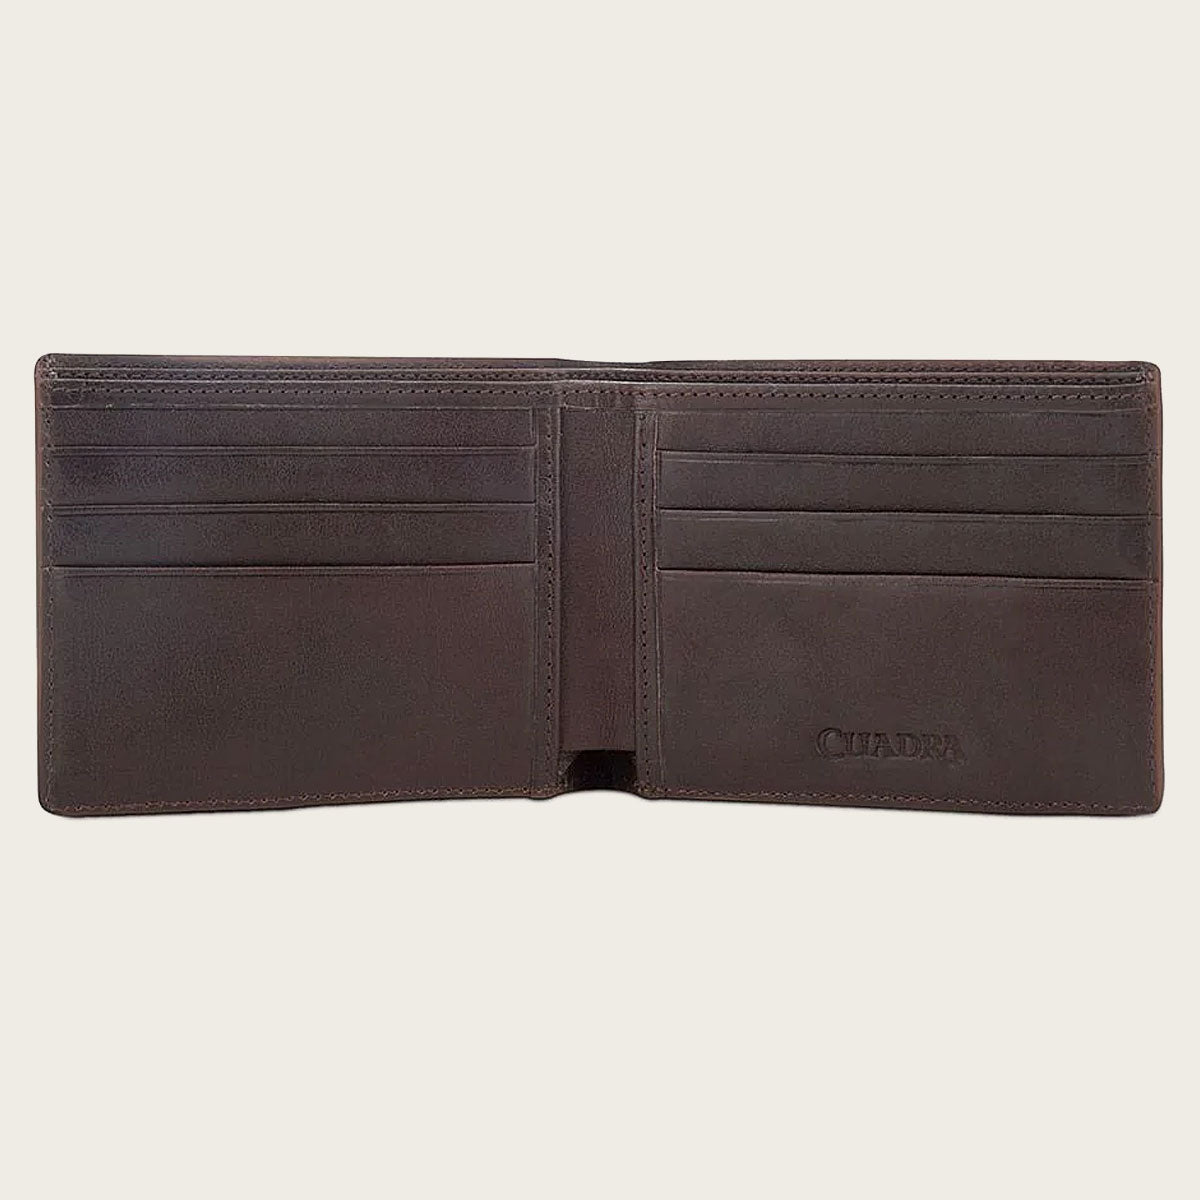 Men's wallet in genuine deer leather. This wallet is the perfect combination of luxury and functionality.